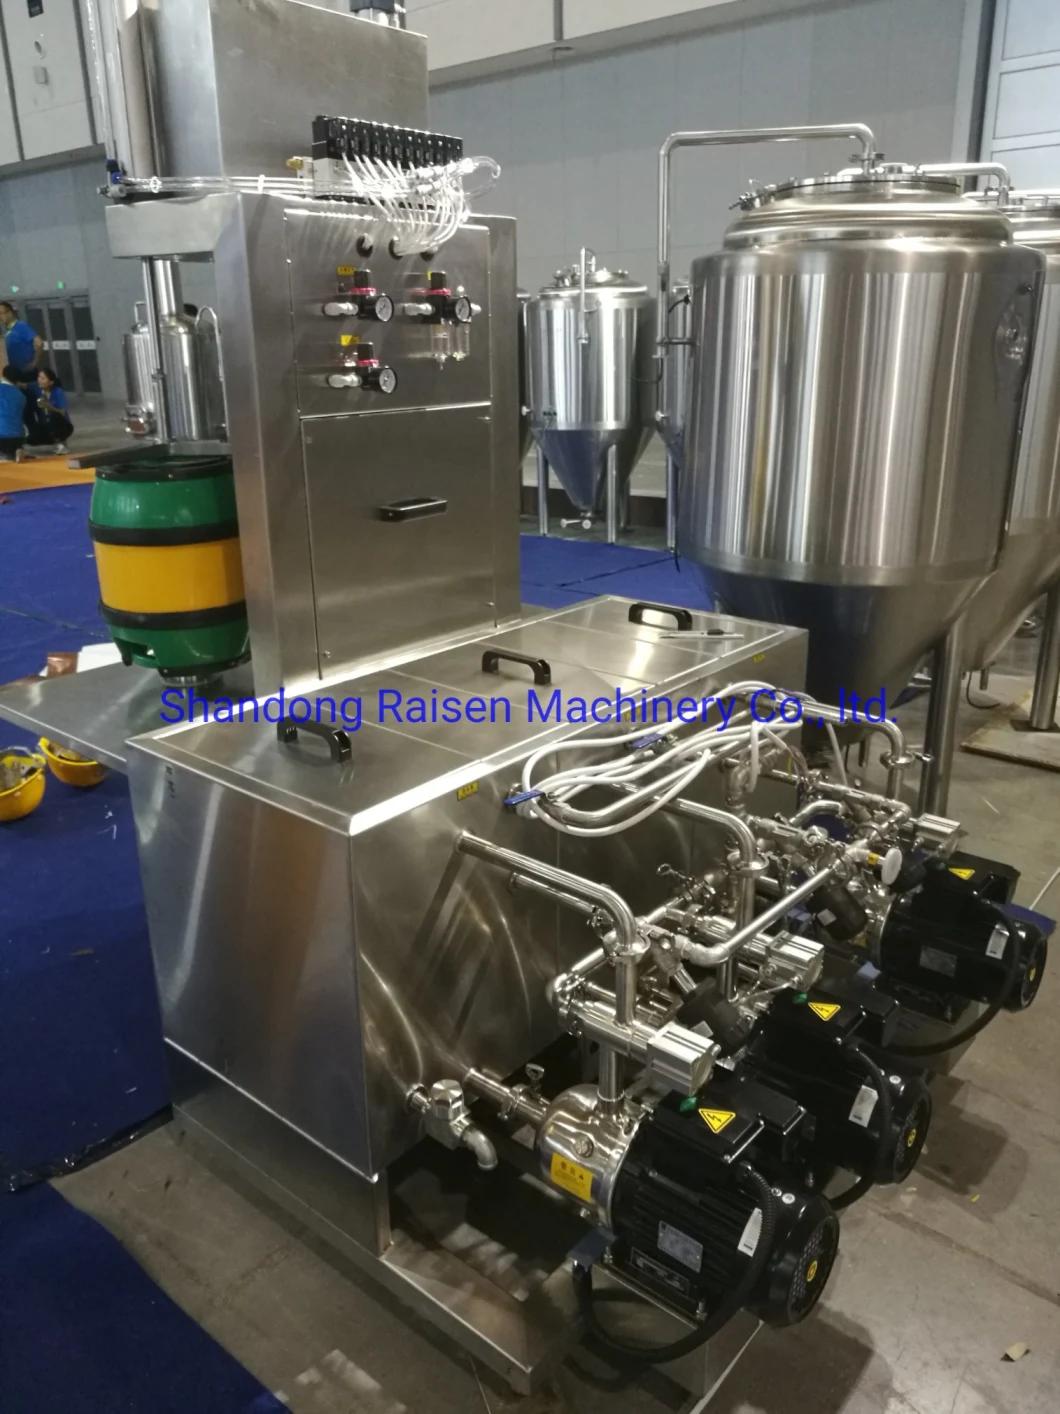 Brewery Equipment, Beer Brewing System Double Head Keg Washer, Keg Washing Machine